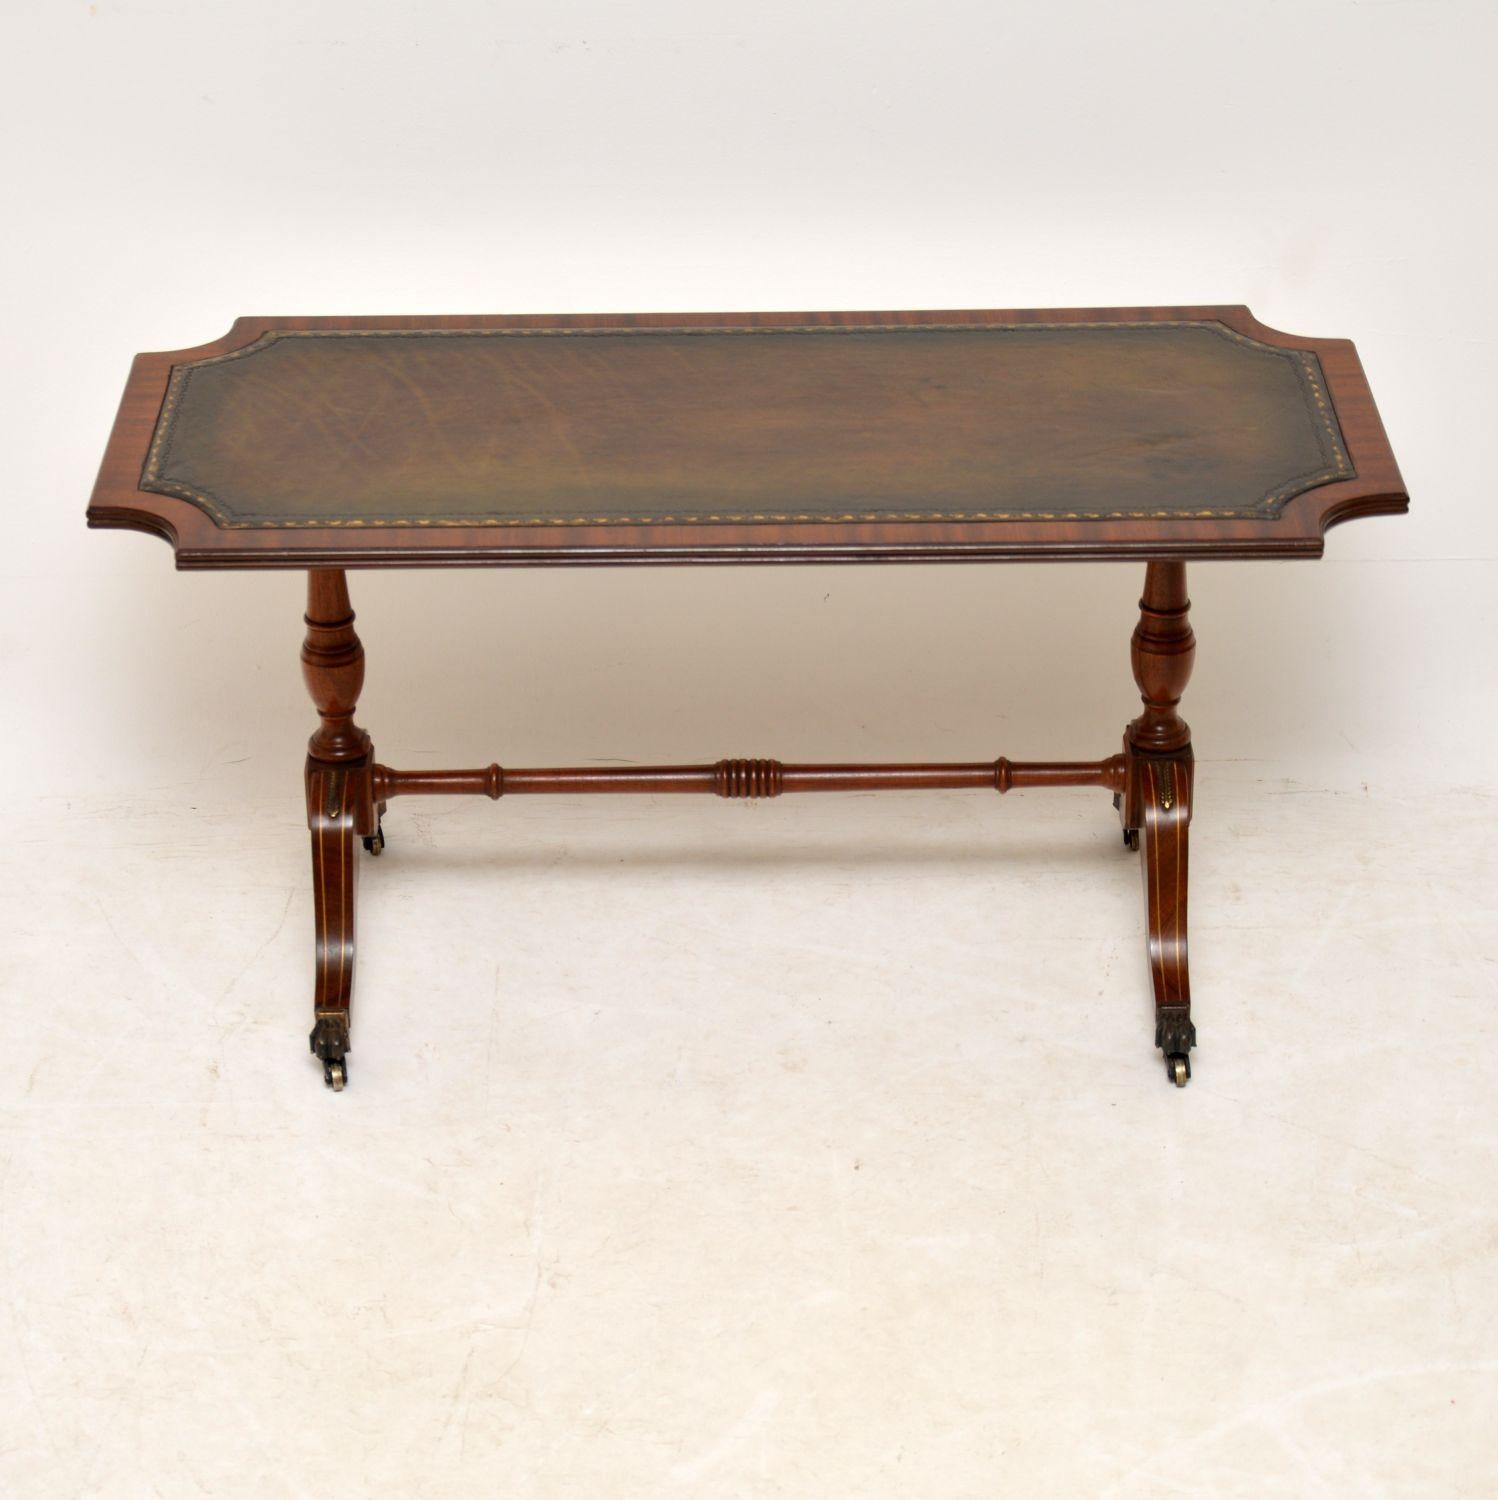 Antique Regency style mahogany leather top coffee table in excellent condition and dating from circa 1950s period.

It has a tooled leather and a reeded top edge. This sits on twin baluster pedestals which have sabre legs below and brass claw